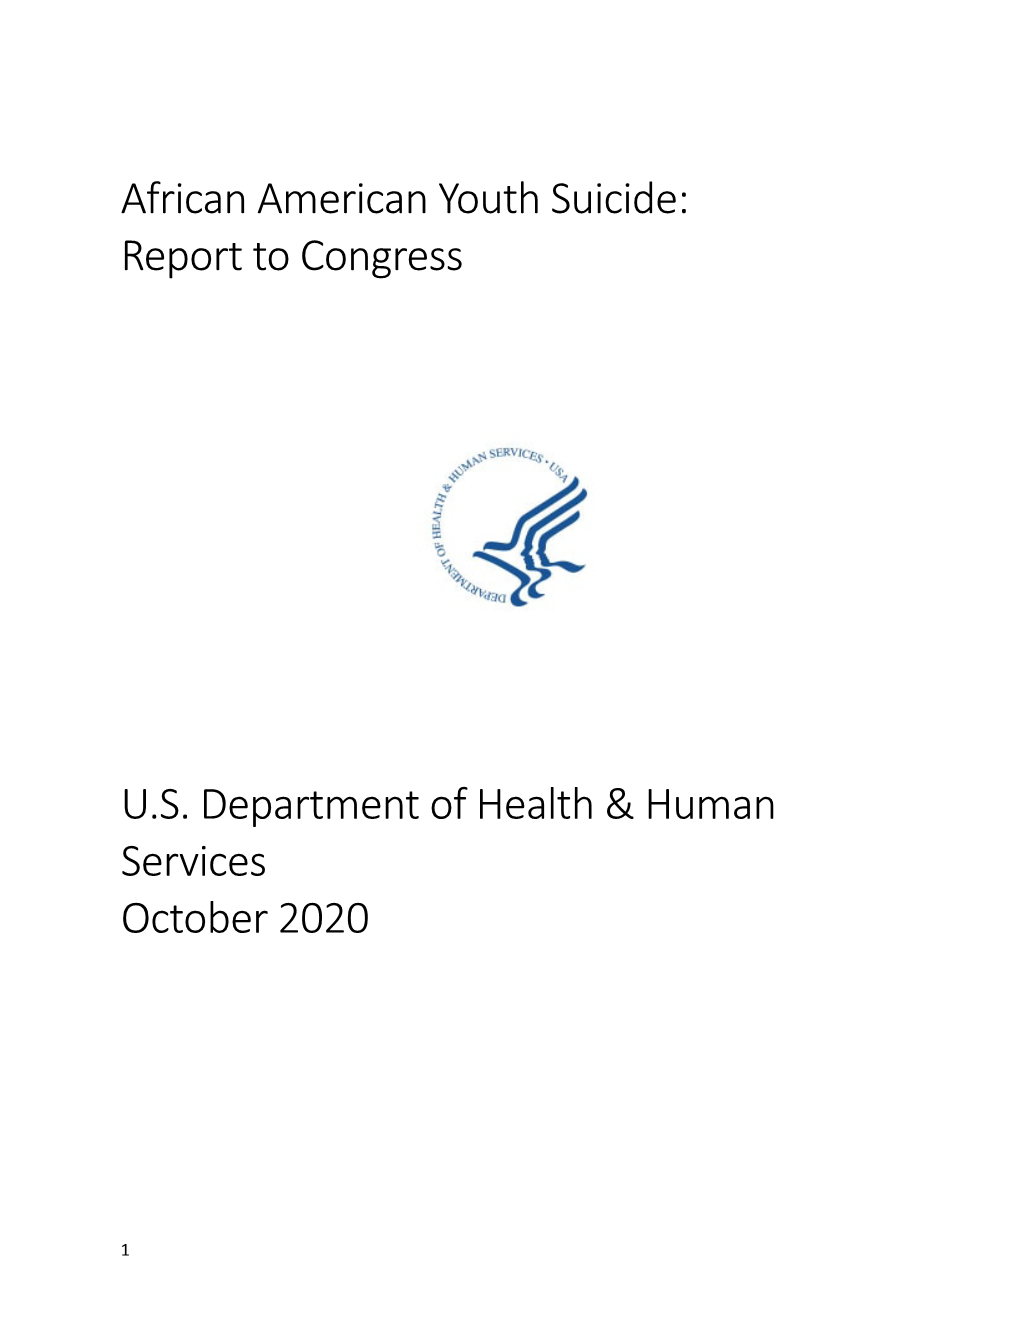 African American Youth Suicide: Report to Congress